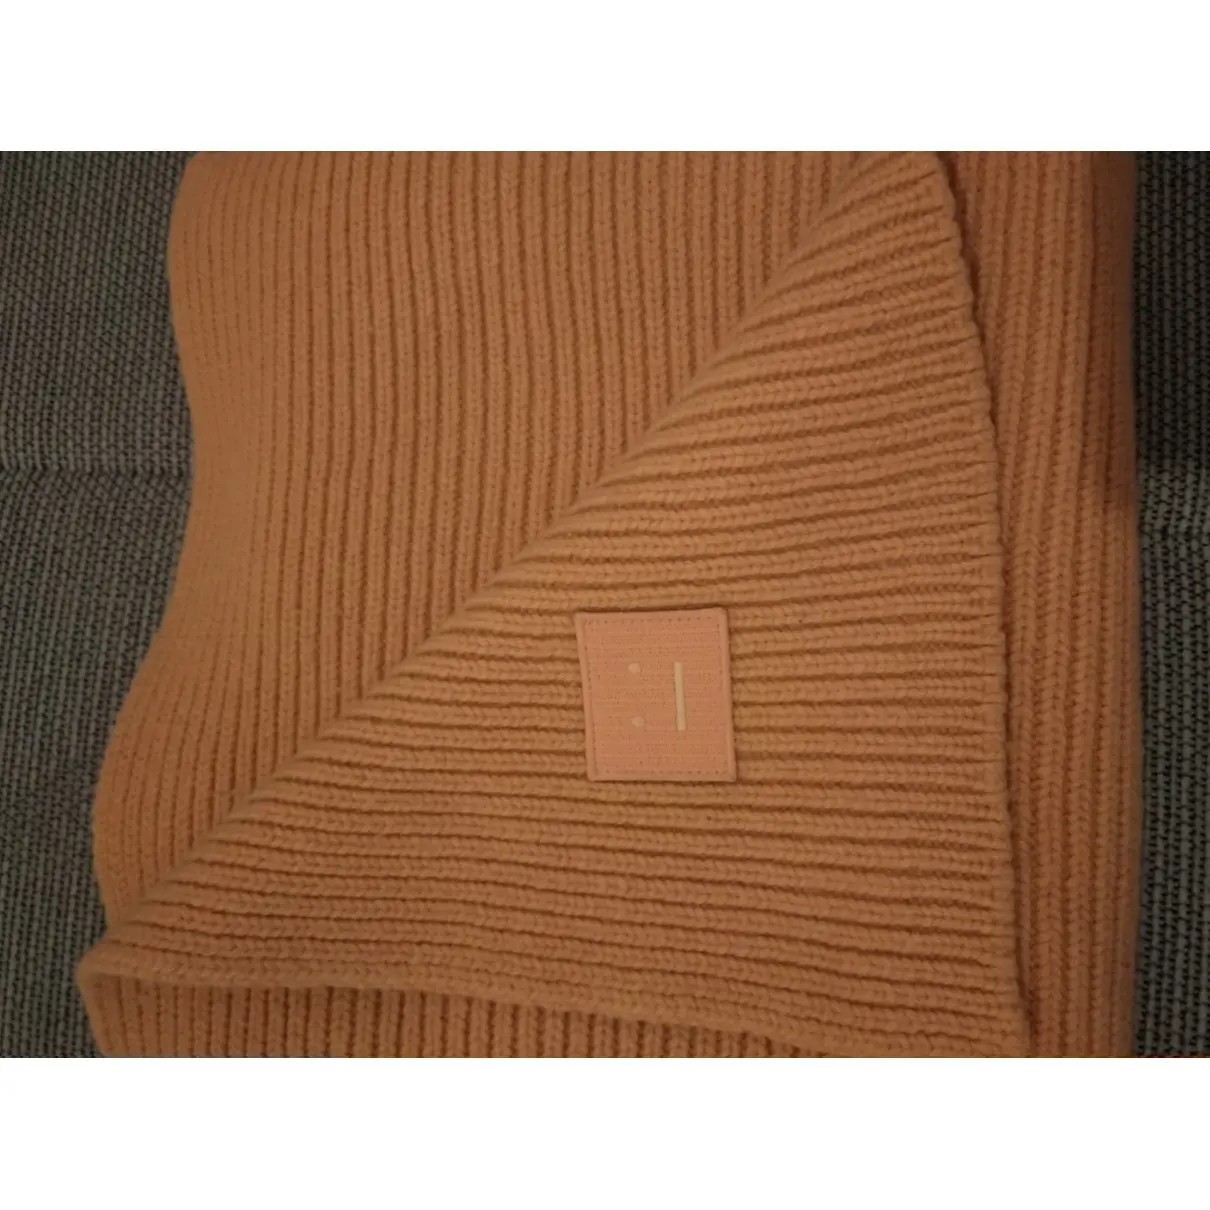 Acne Studios Wool scarf for sale